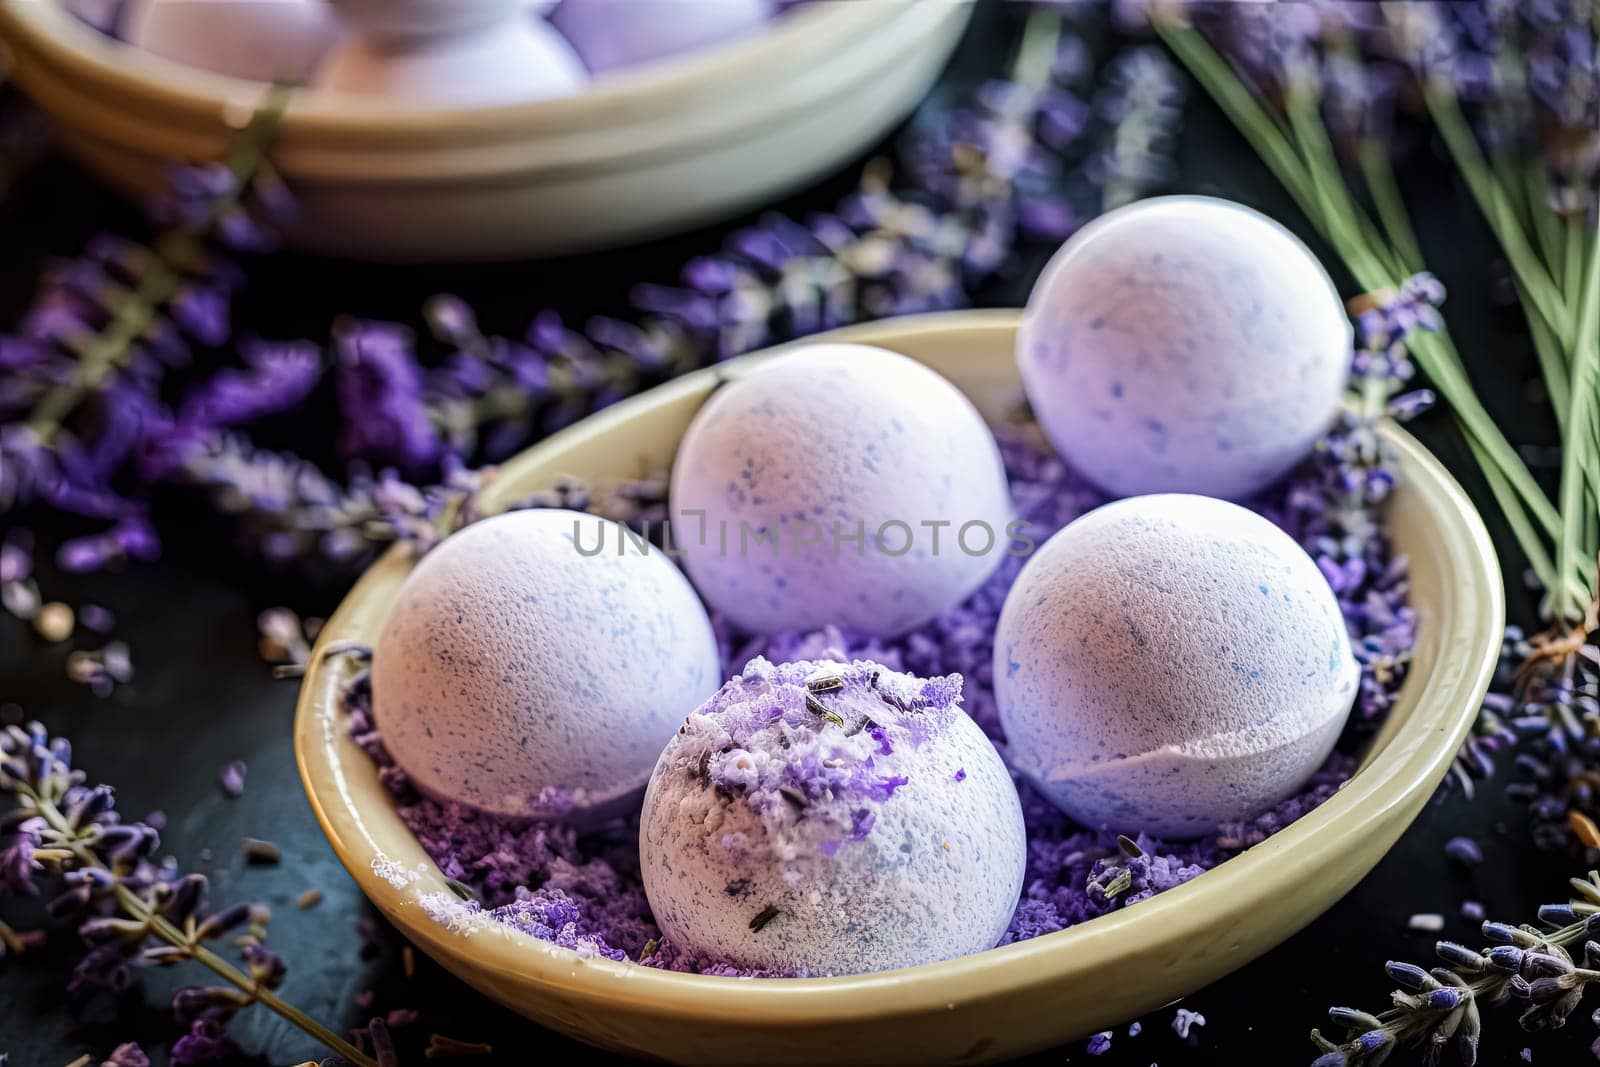 Indulge in a relaxing bath with our lavender bath bomb, infused with essential oils and topped with fragrant lavender flowers for a spa-like experience.